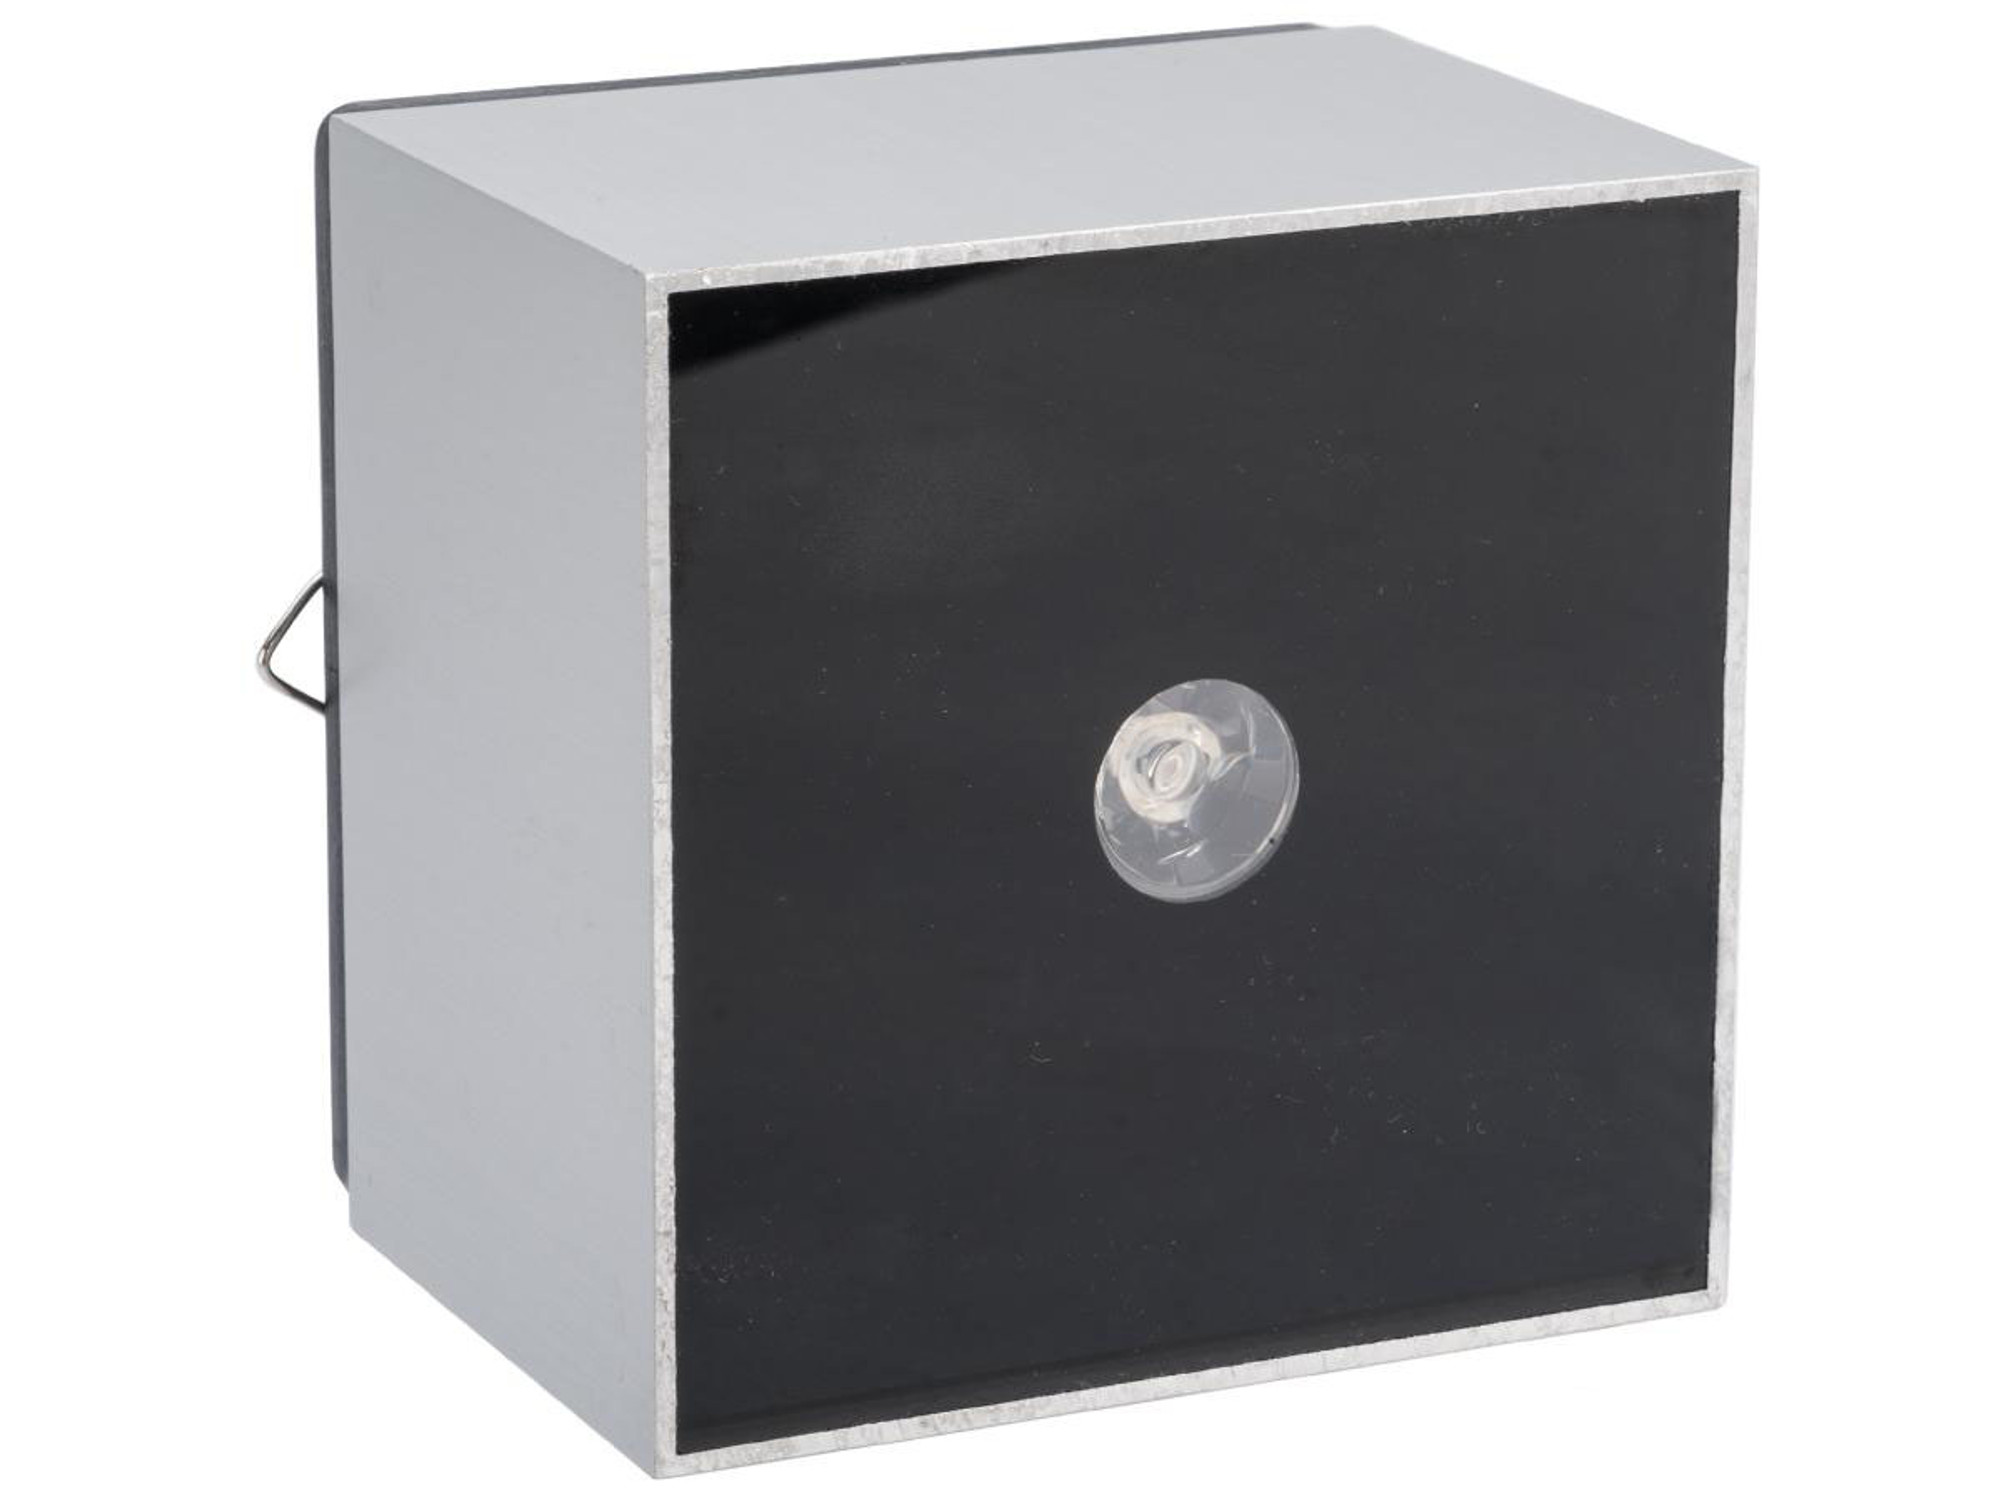 Skyway Airsoft "CUBE" Interactive Electric Airsoft Target